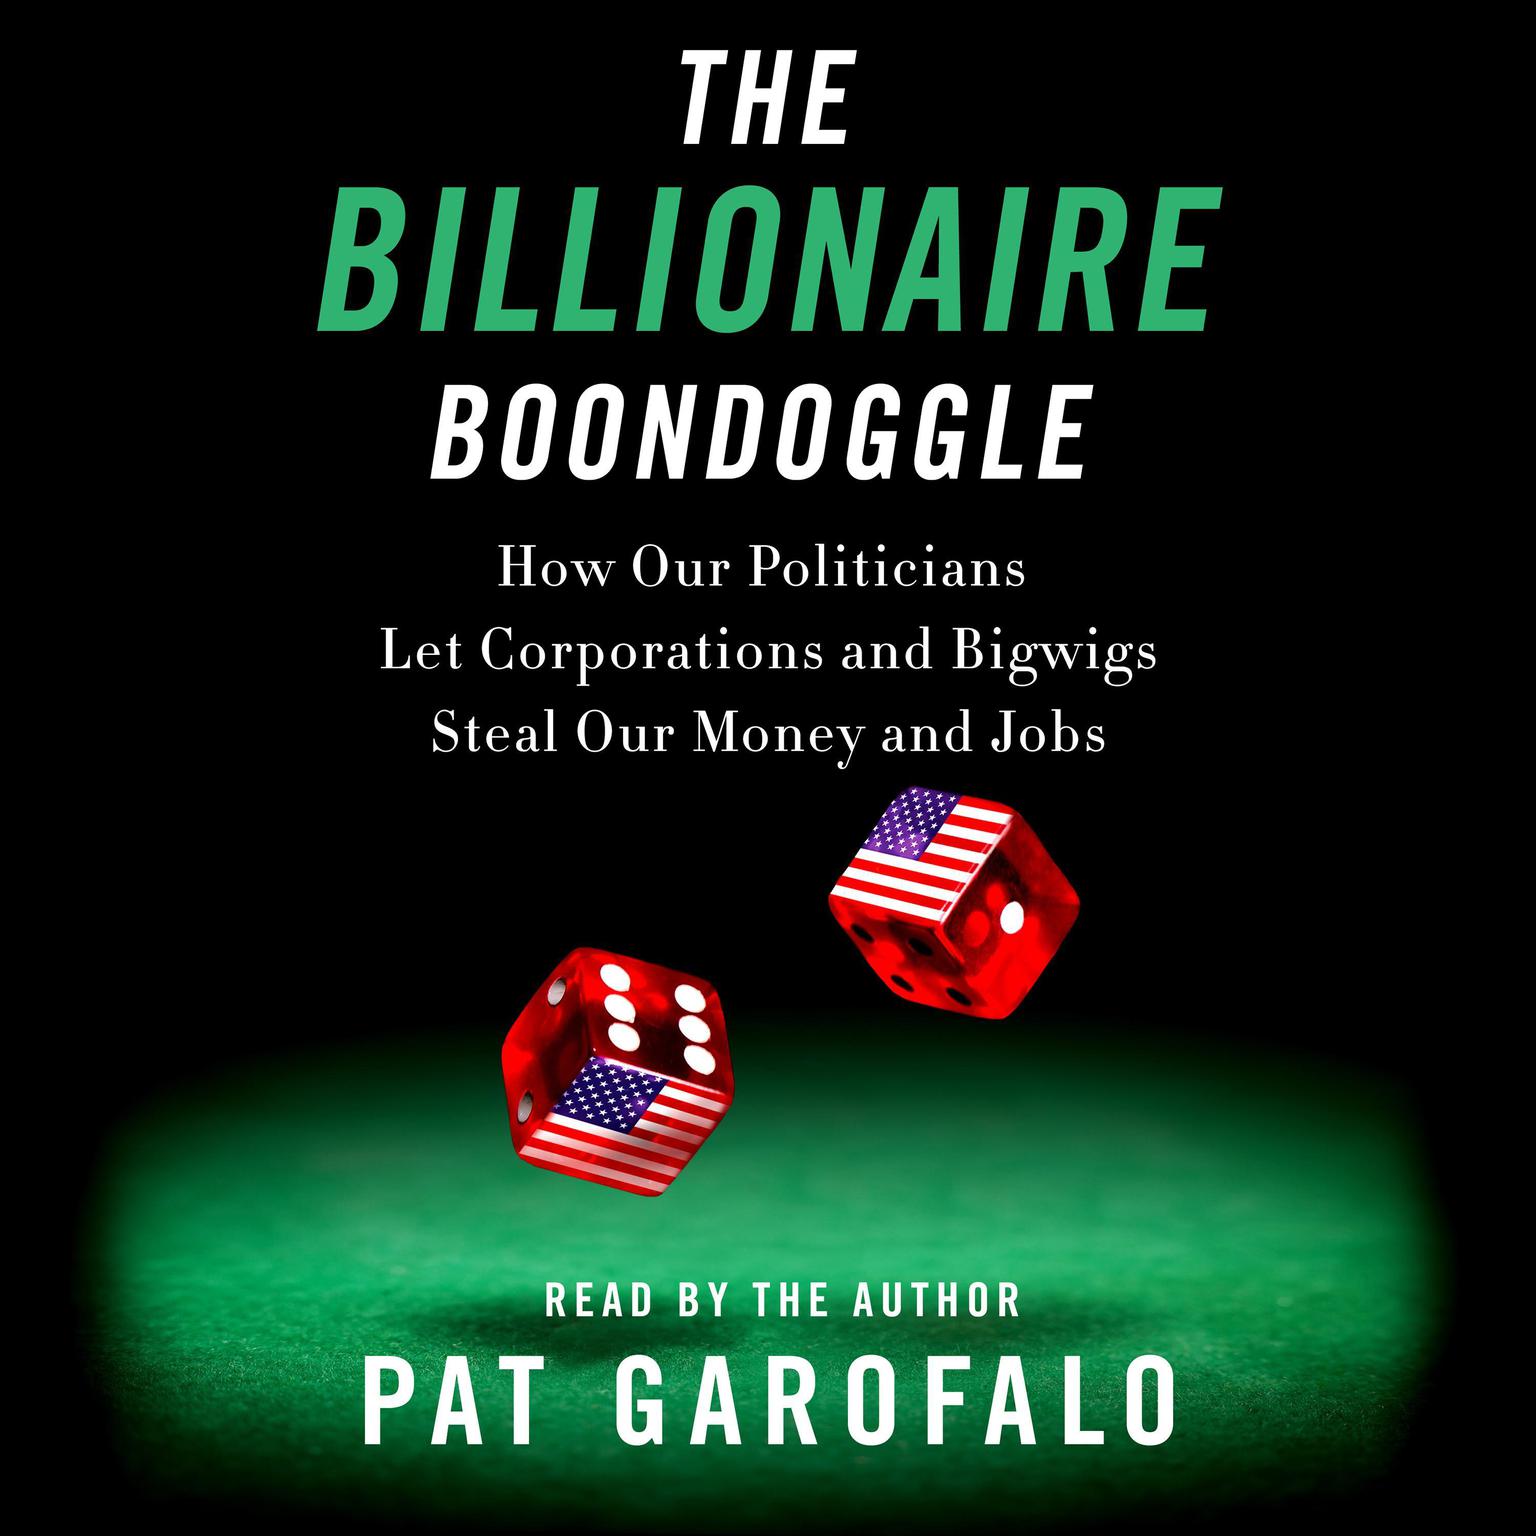 The Billionaire Boondoggle: How Our Politicians Let Corporations and Bigwigs Steal Our Money and Jobs Audiobook, by Pat Garofalo